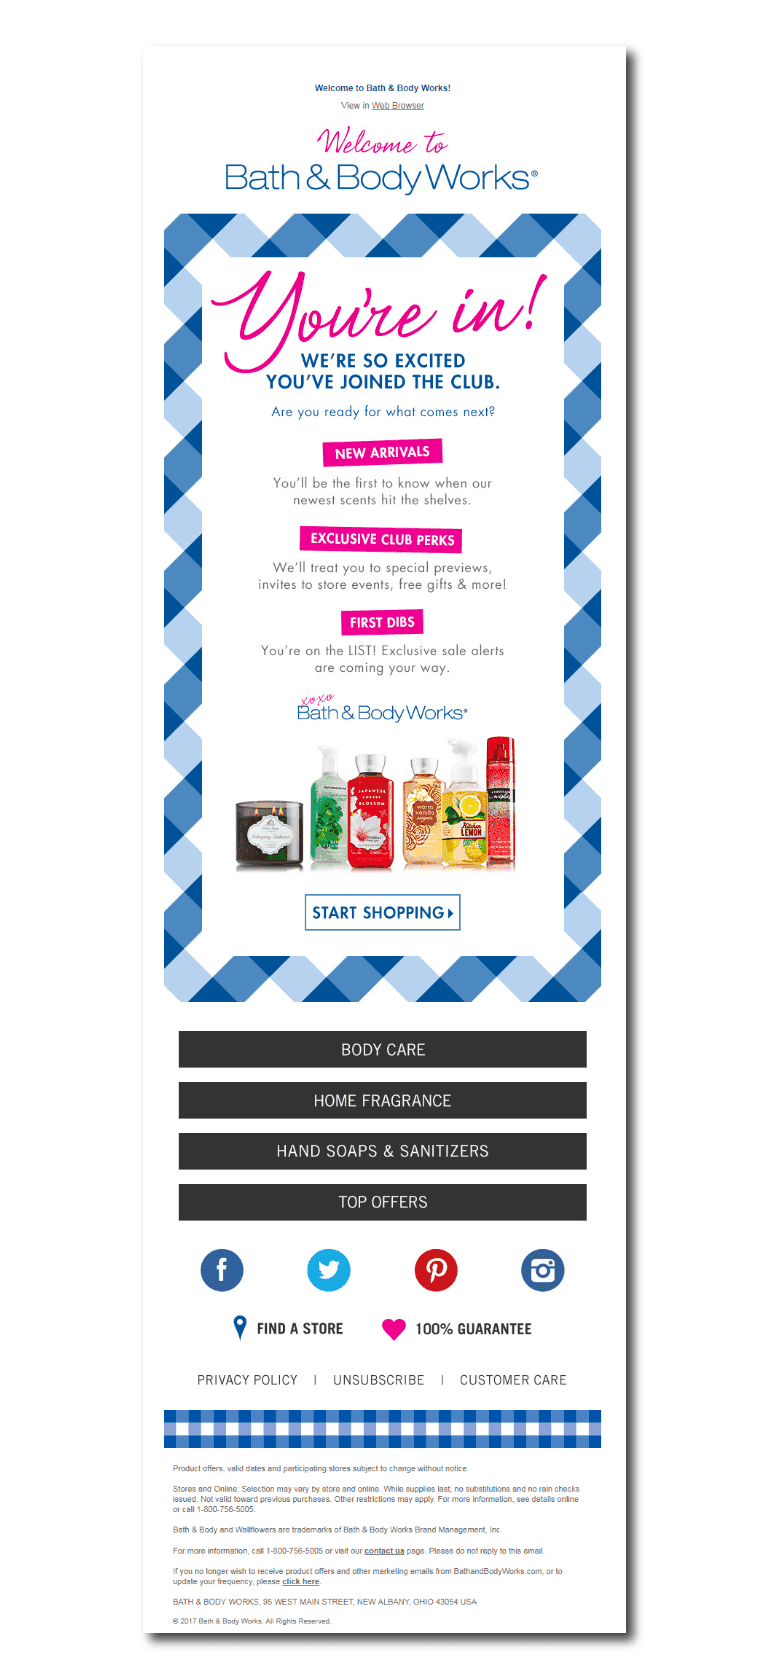 Example of a welcome email from Bath and Body Works